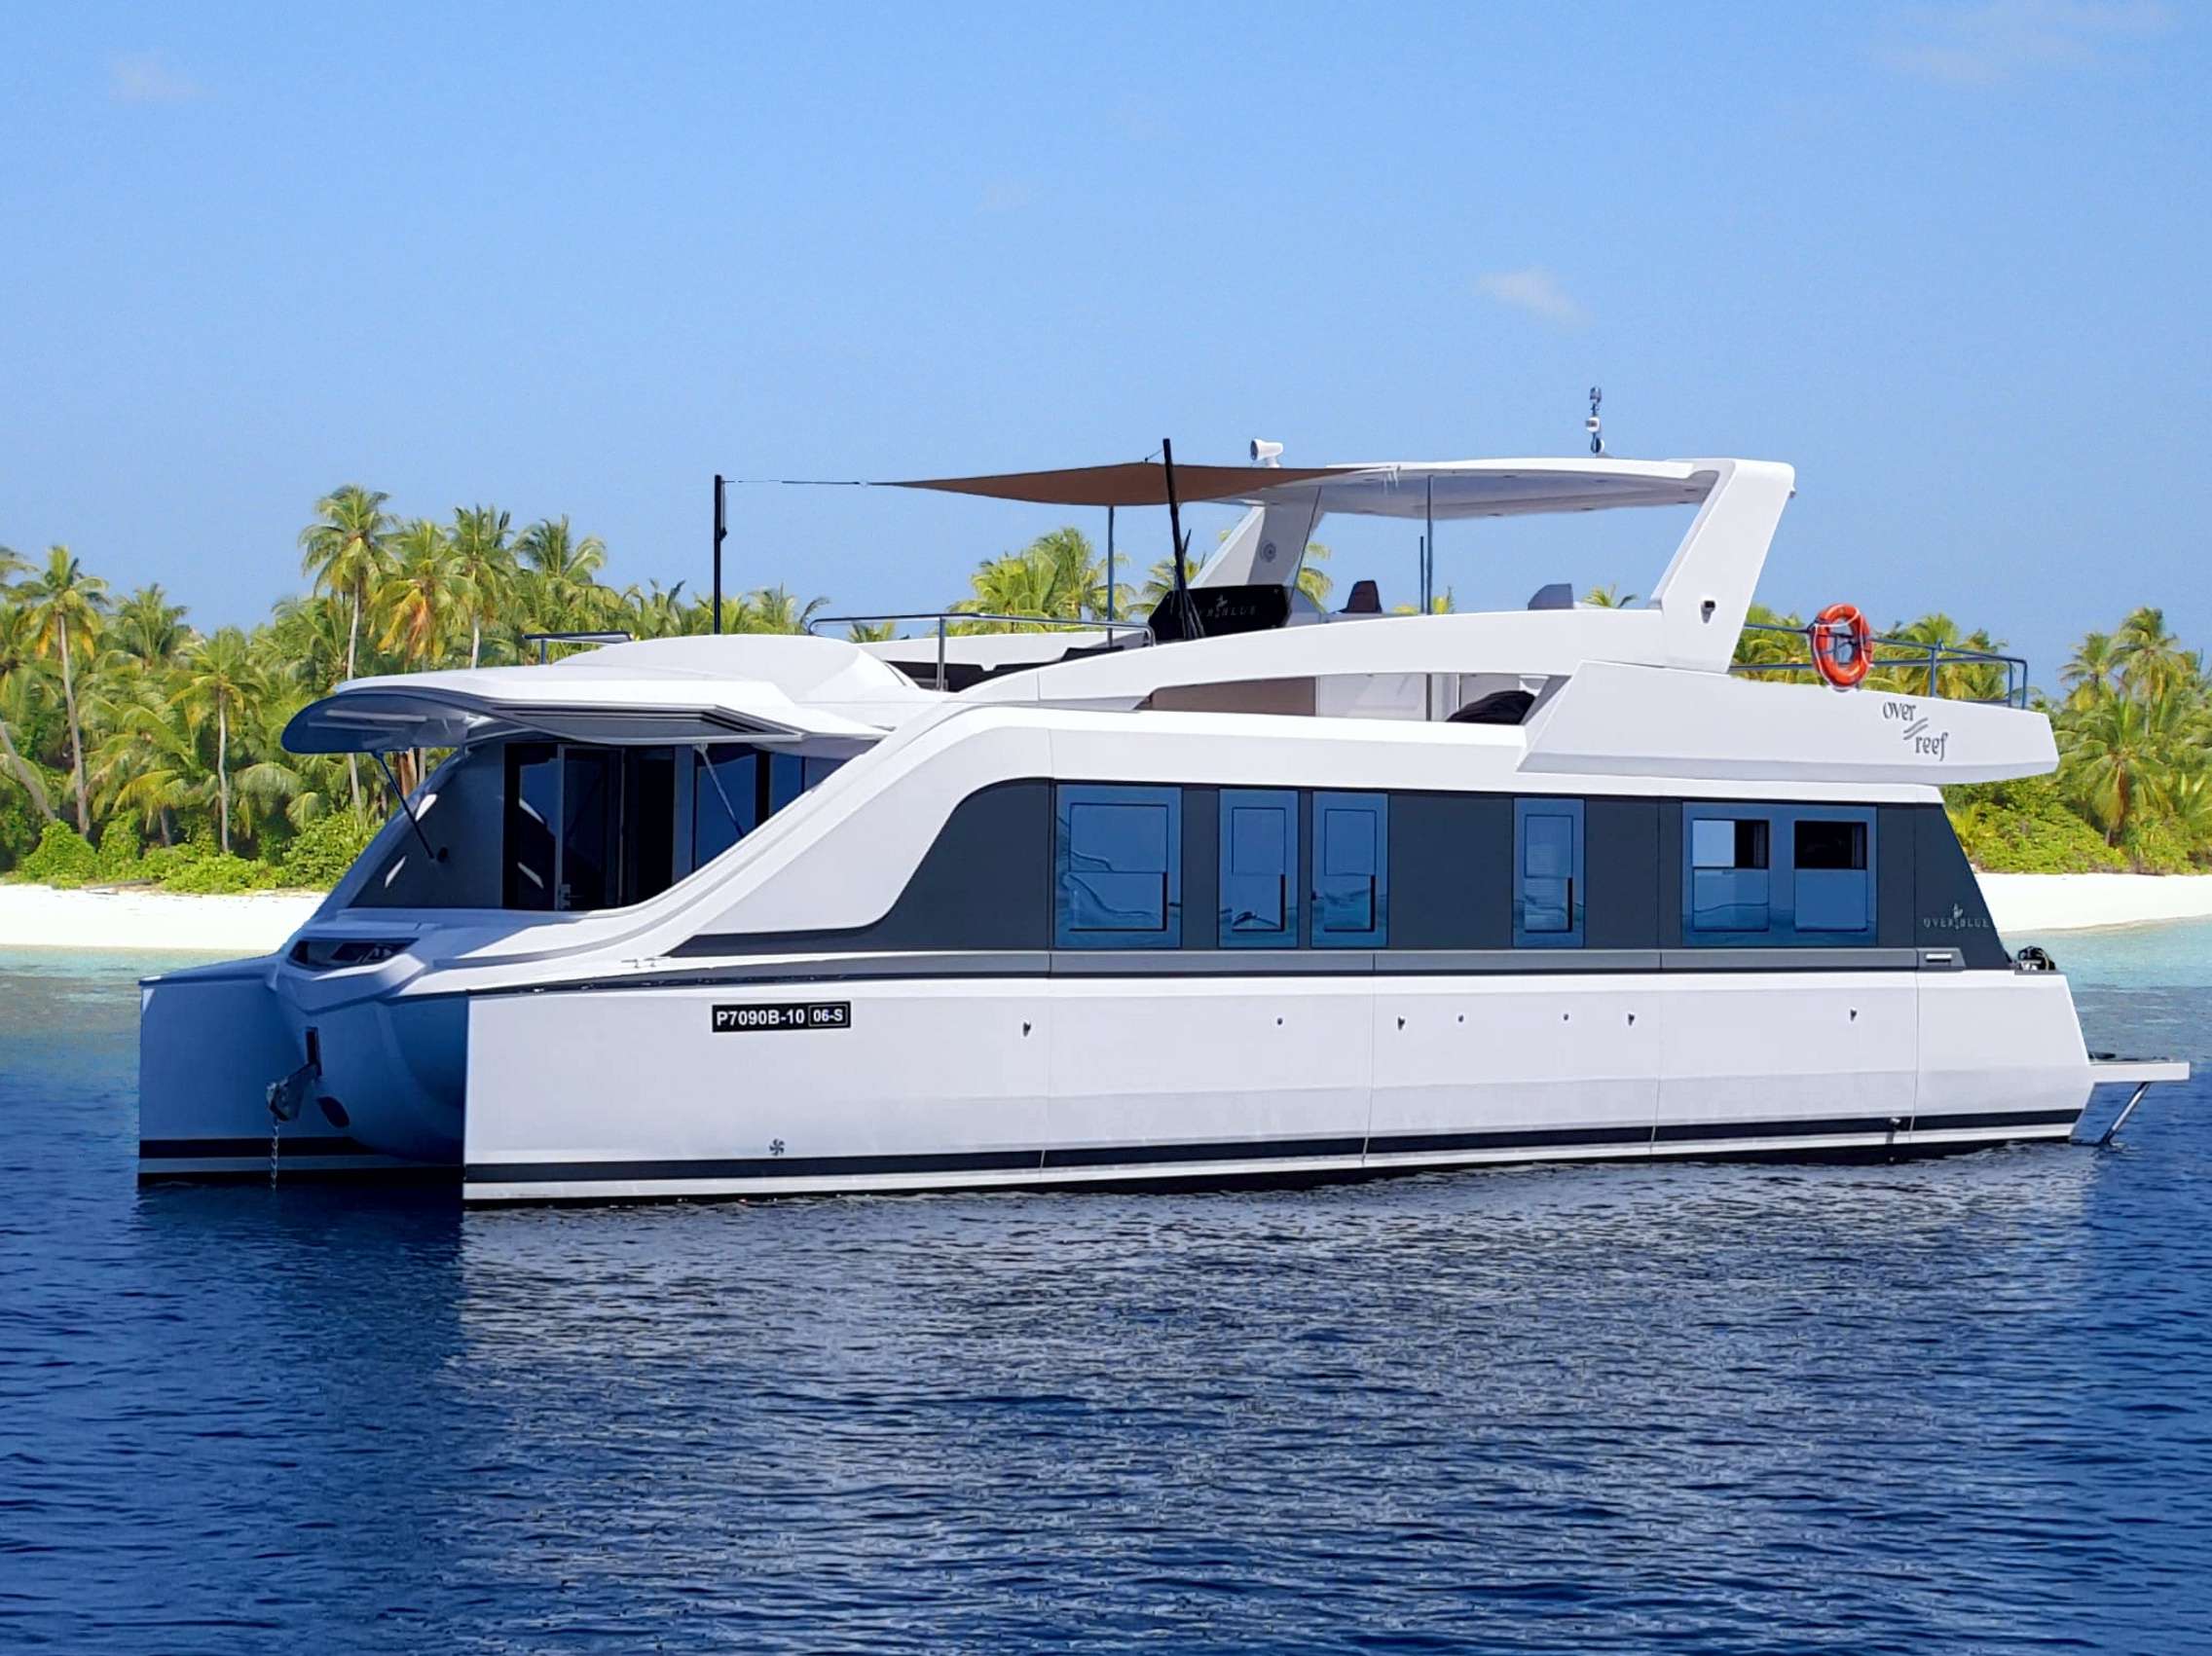 OVER REEF - Luxury yacht charter Maldives & Boat hire in Indian Ocean & SE Asia 1